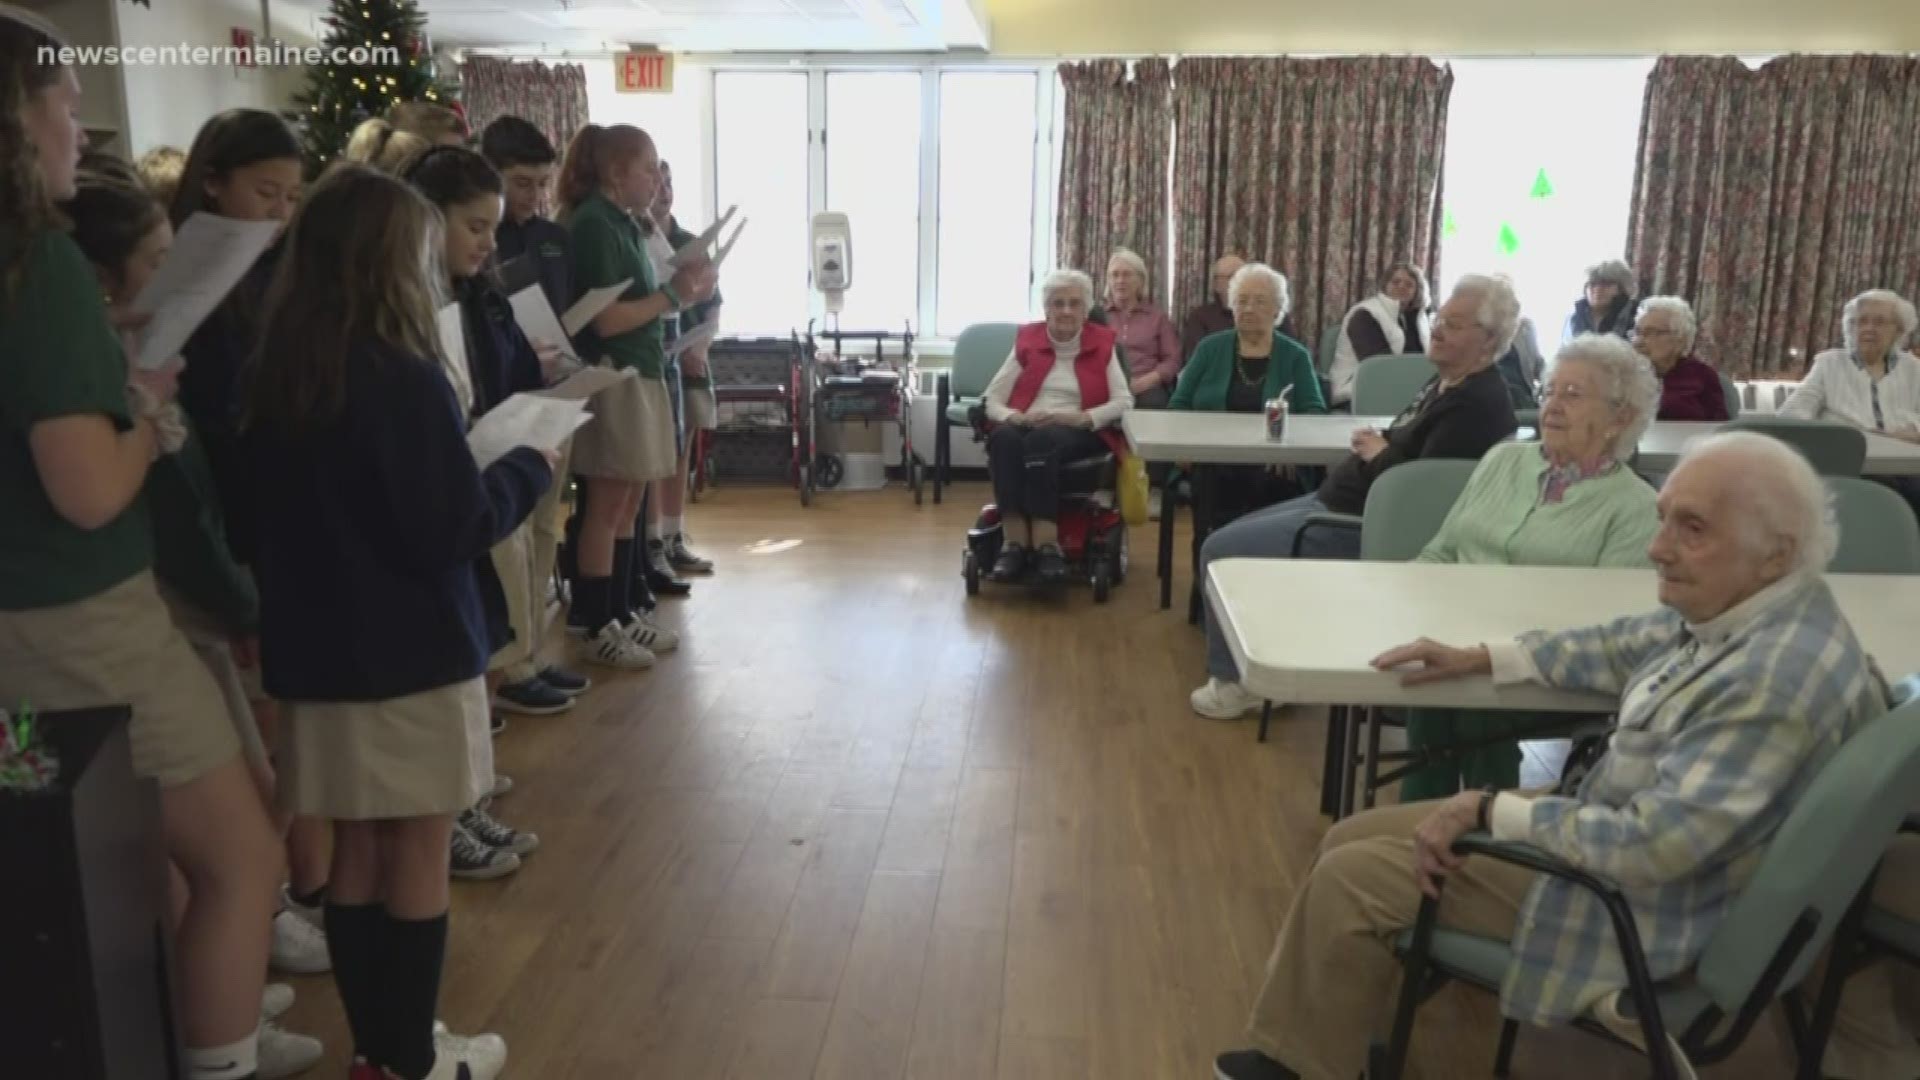 Students stepping up and making a difference in the lives of their older neighbors at The Phillips Strickland House where 45 seniors live together, but independently